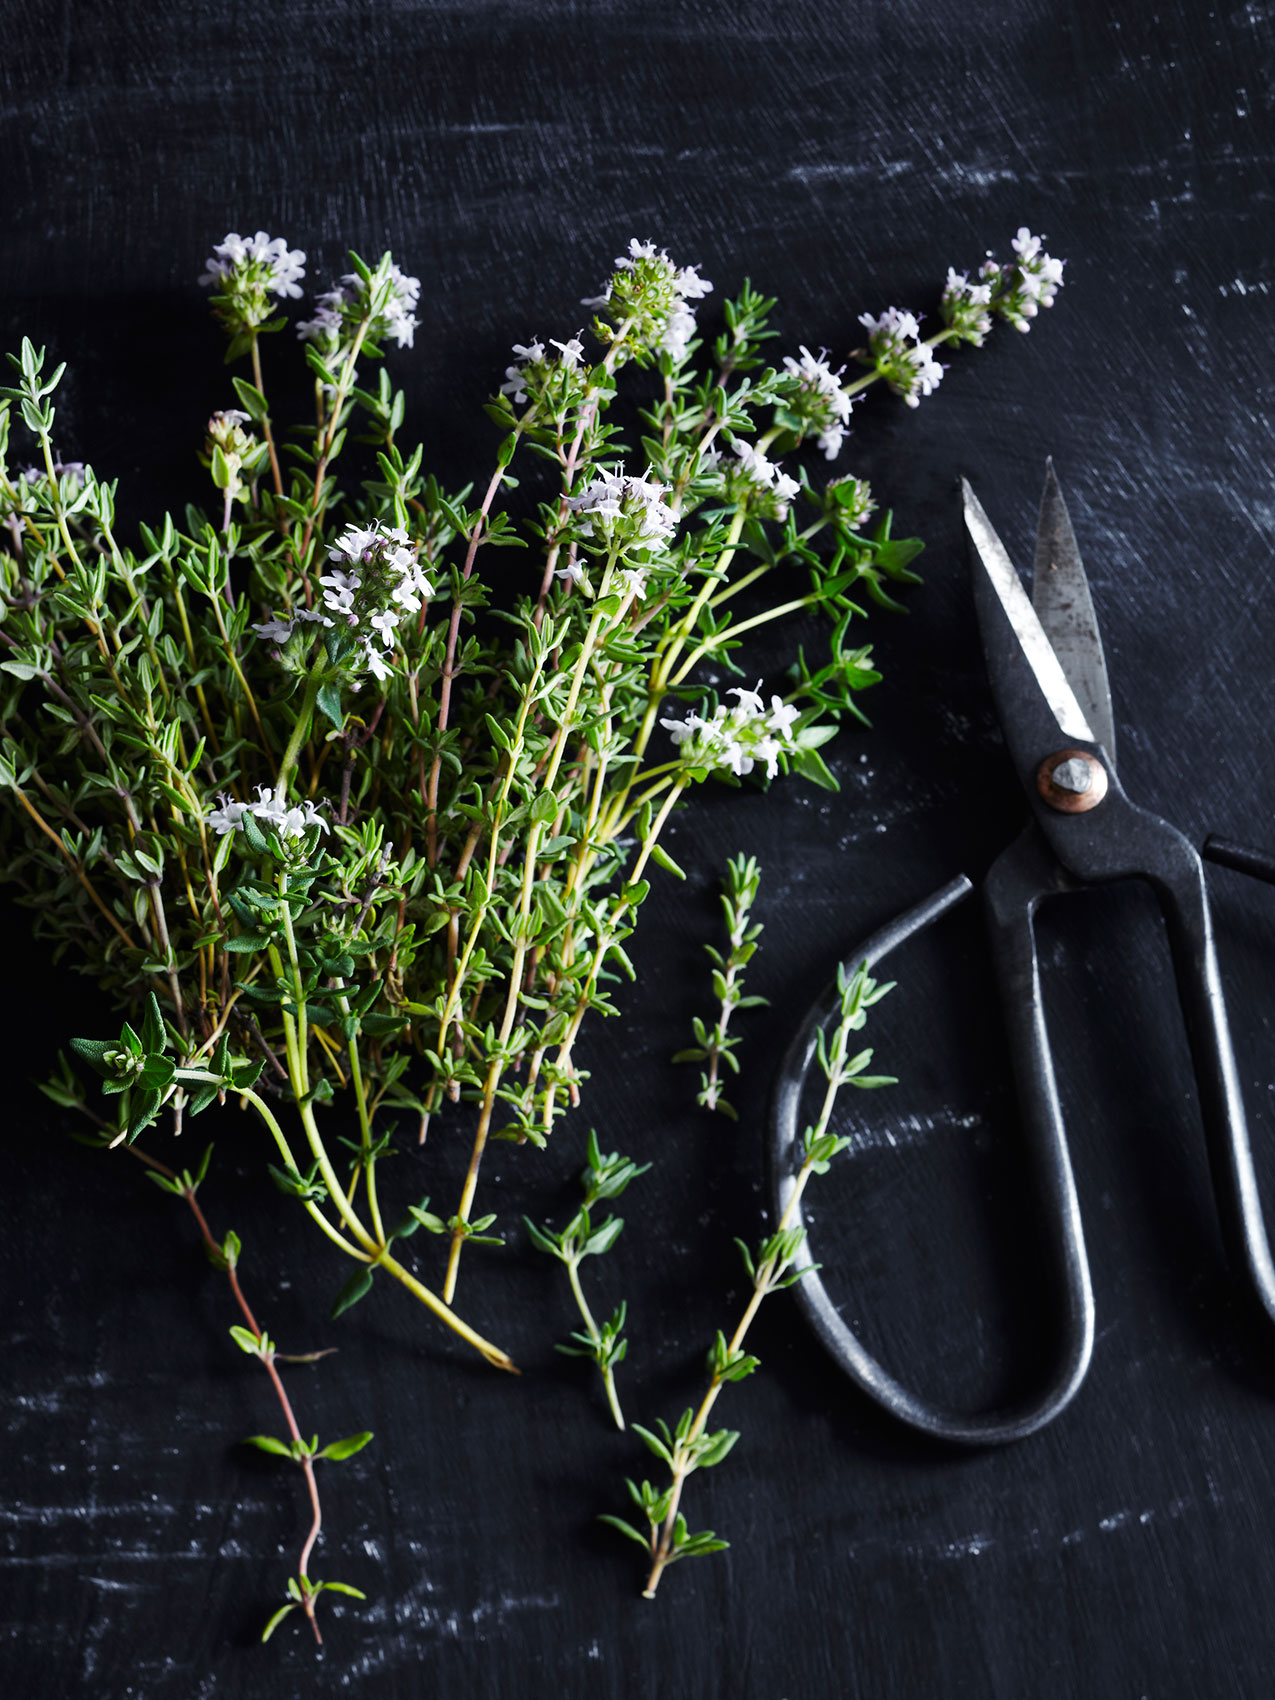 Freshly Cut Thyme & Scissors • Advertising & Editorial Food Photography